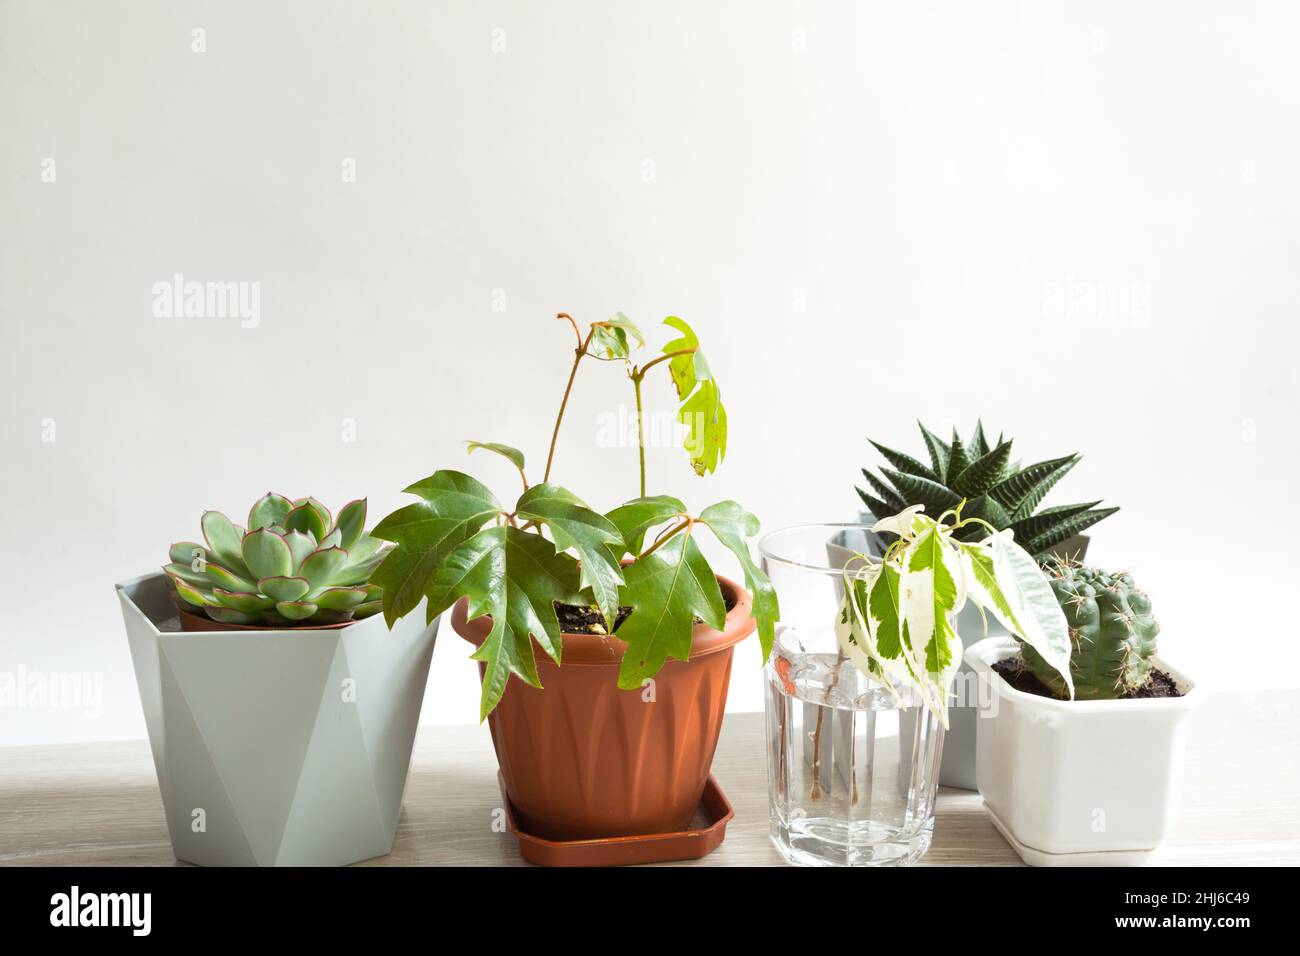 A group of popular potted house plants: Haworthia, Ficus,Rhoicissus, Cactus, Echeveria. Care of indoor plants Stock Photo